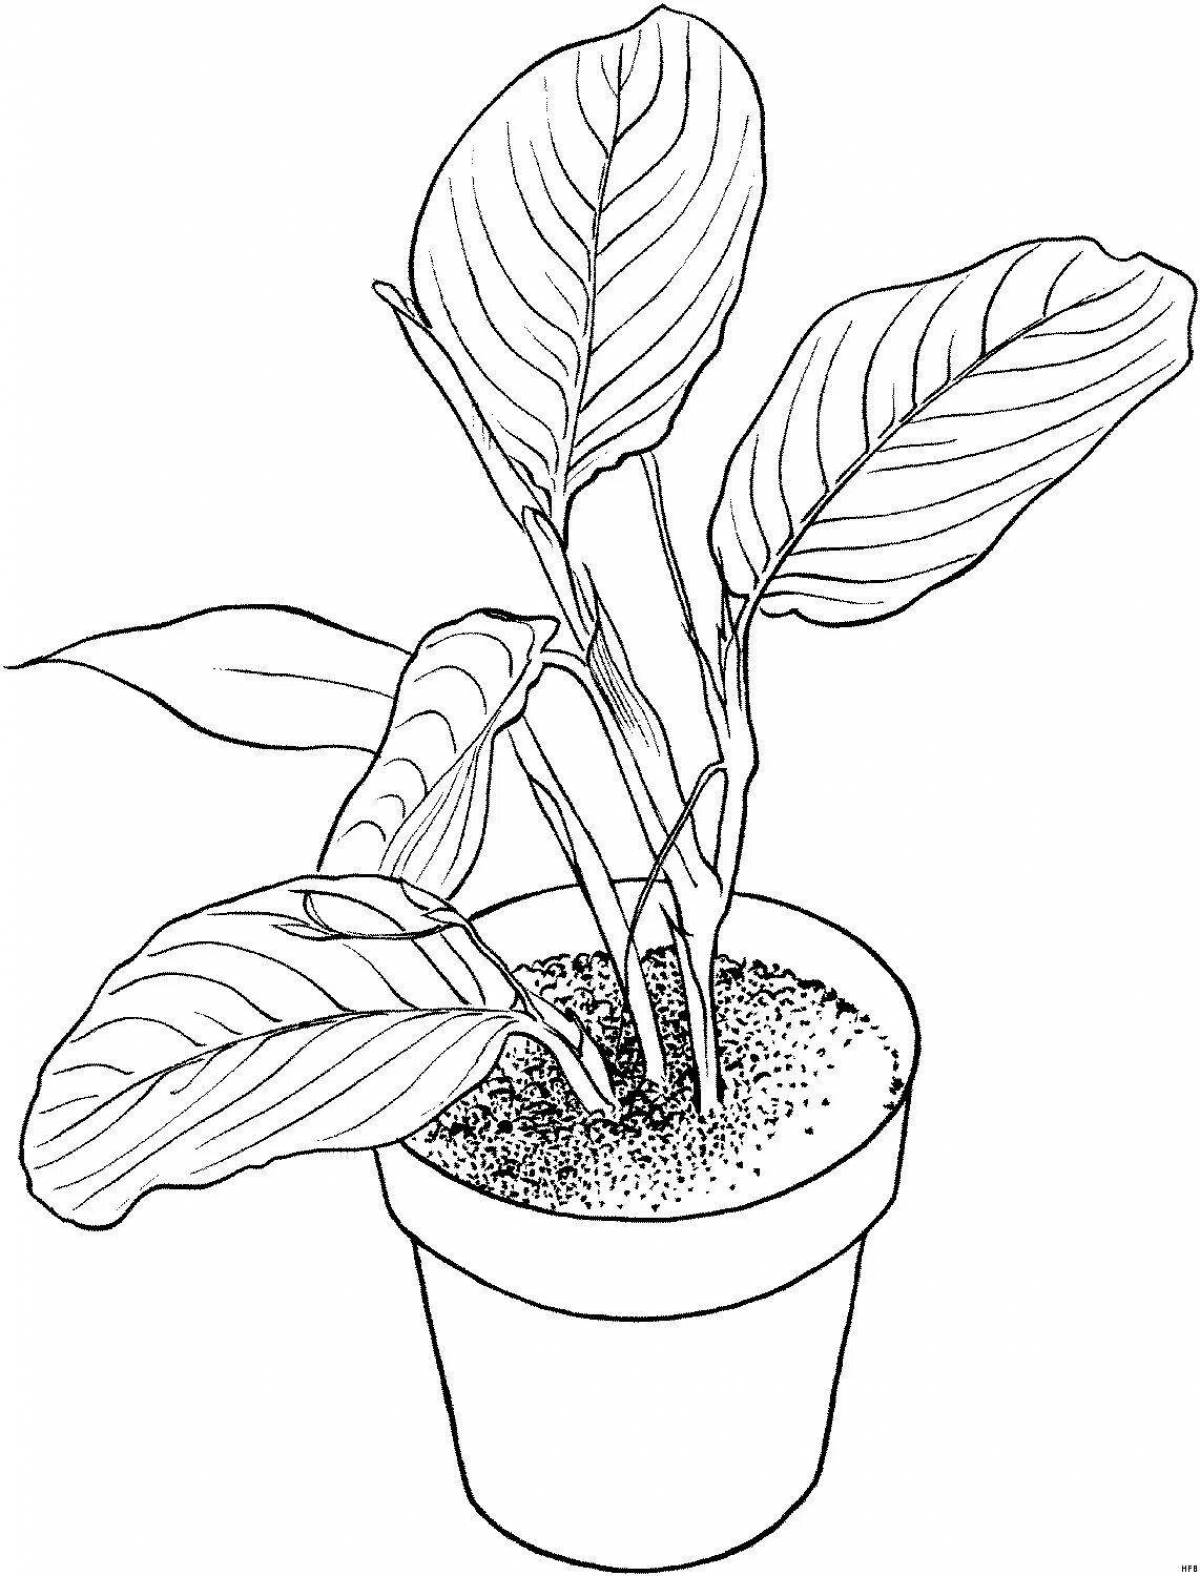 Inspirational ficus coloring book for teens